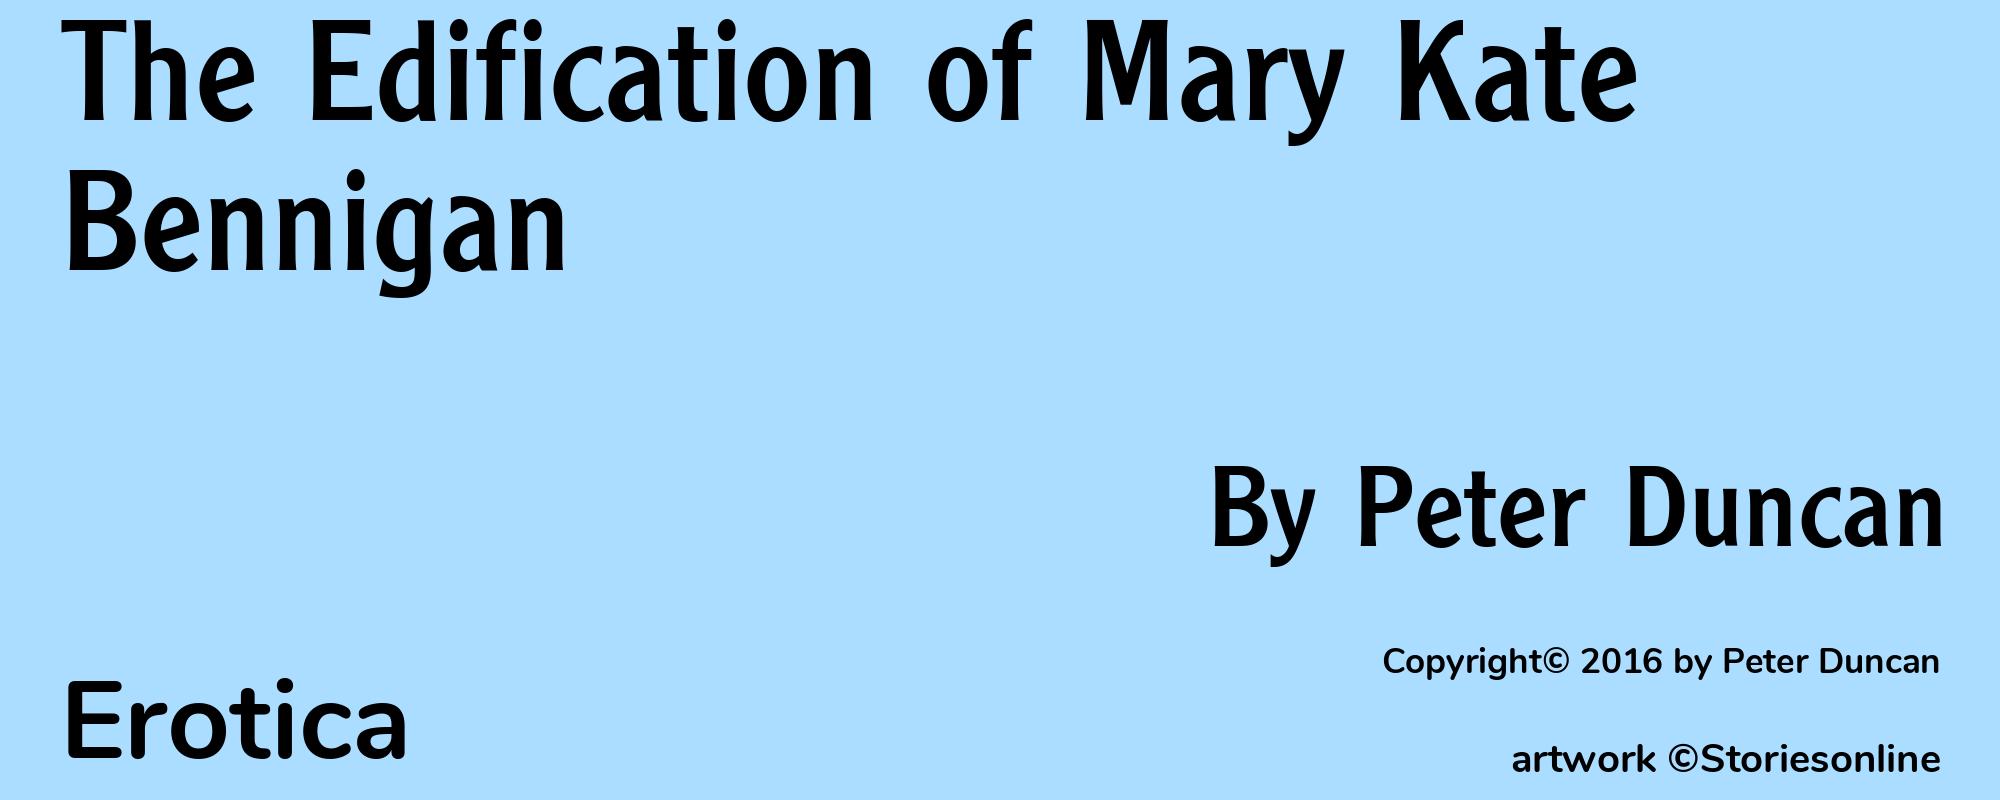 The Edification of Mary Kate Bennigan - Cover